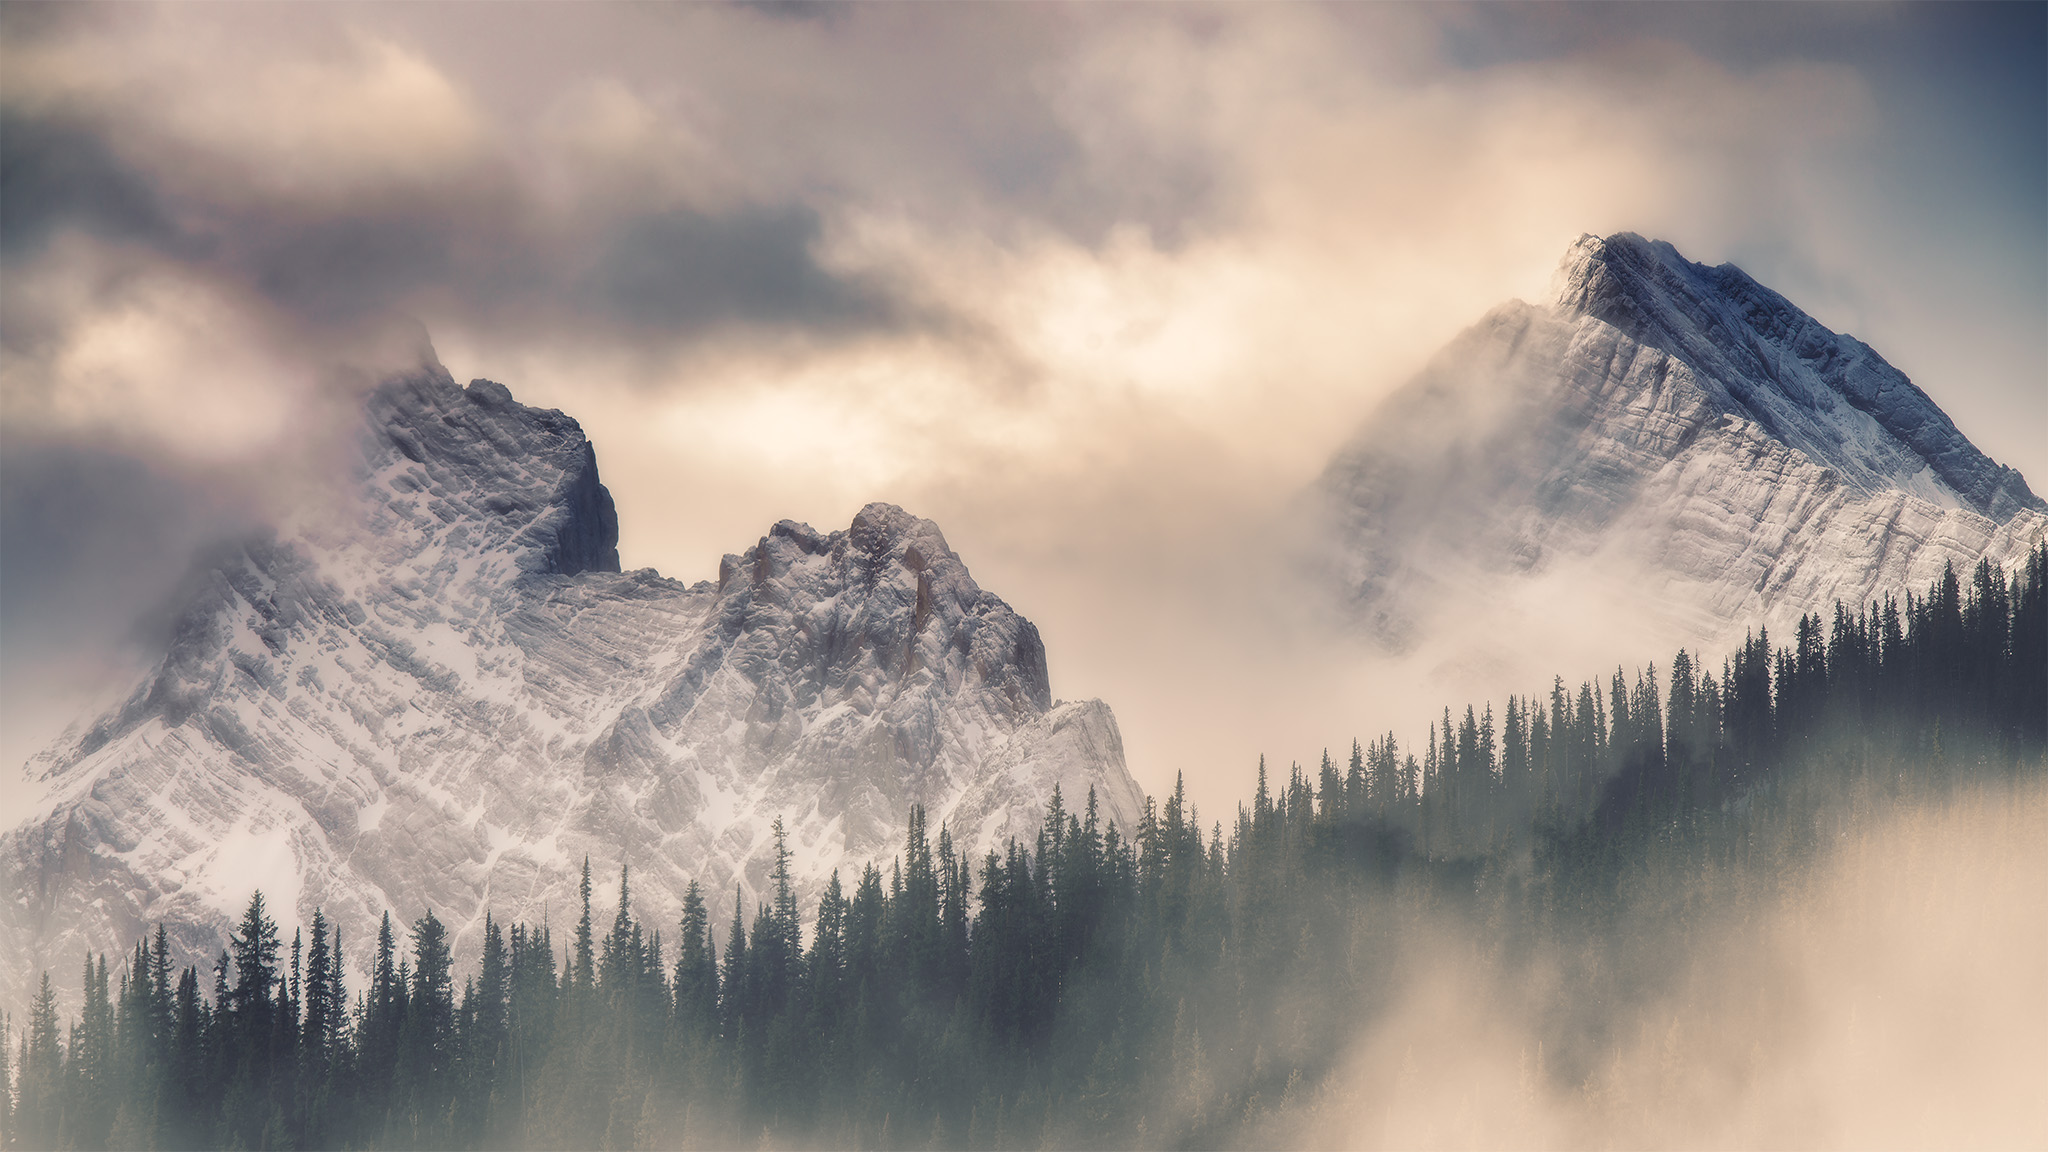 An intimate landscape photograph of two mountains surrounded in light and clouds in the Canadian Rockies